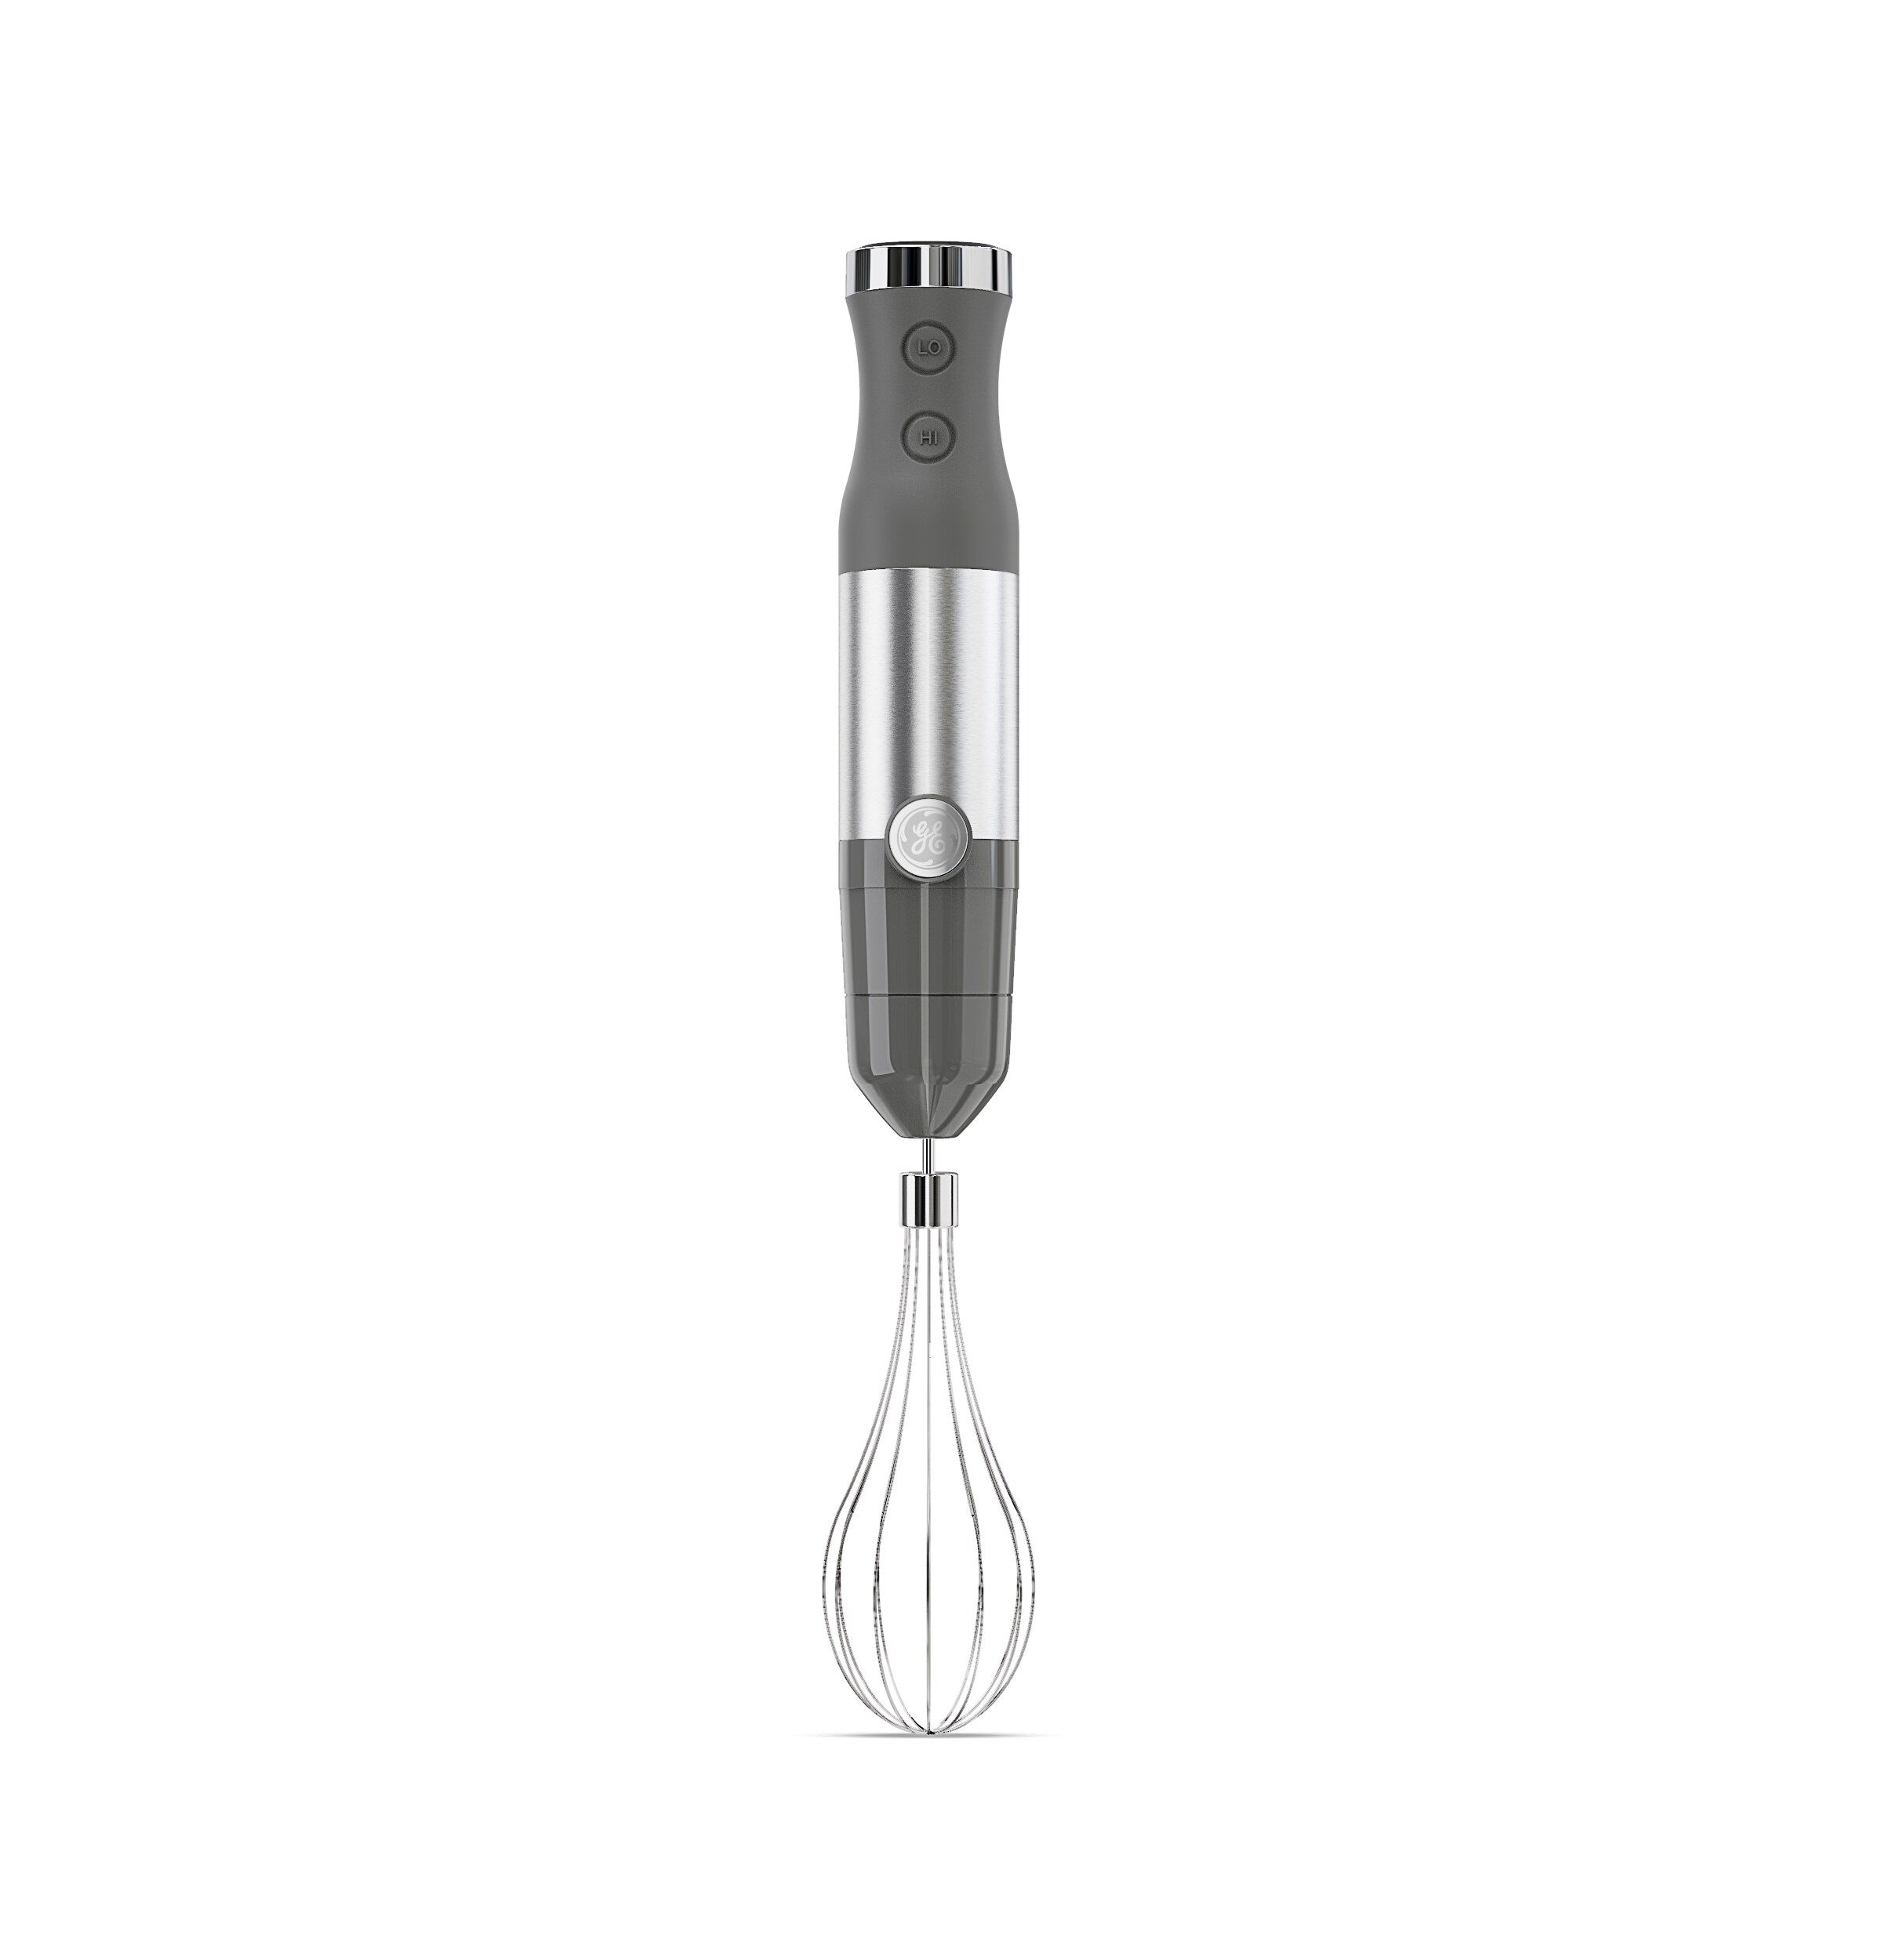 GE Immersion Blender | Handheld Blender for Shakes, Smoothies, Baby Food &  More | Includes Whisk & Blending Jar | 2-Speed | Interchangeable Attachment